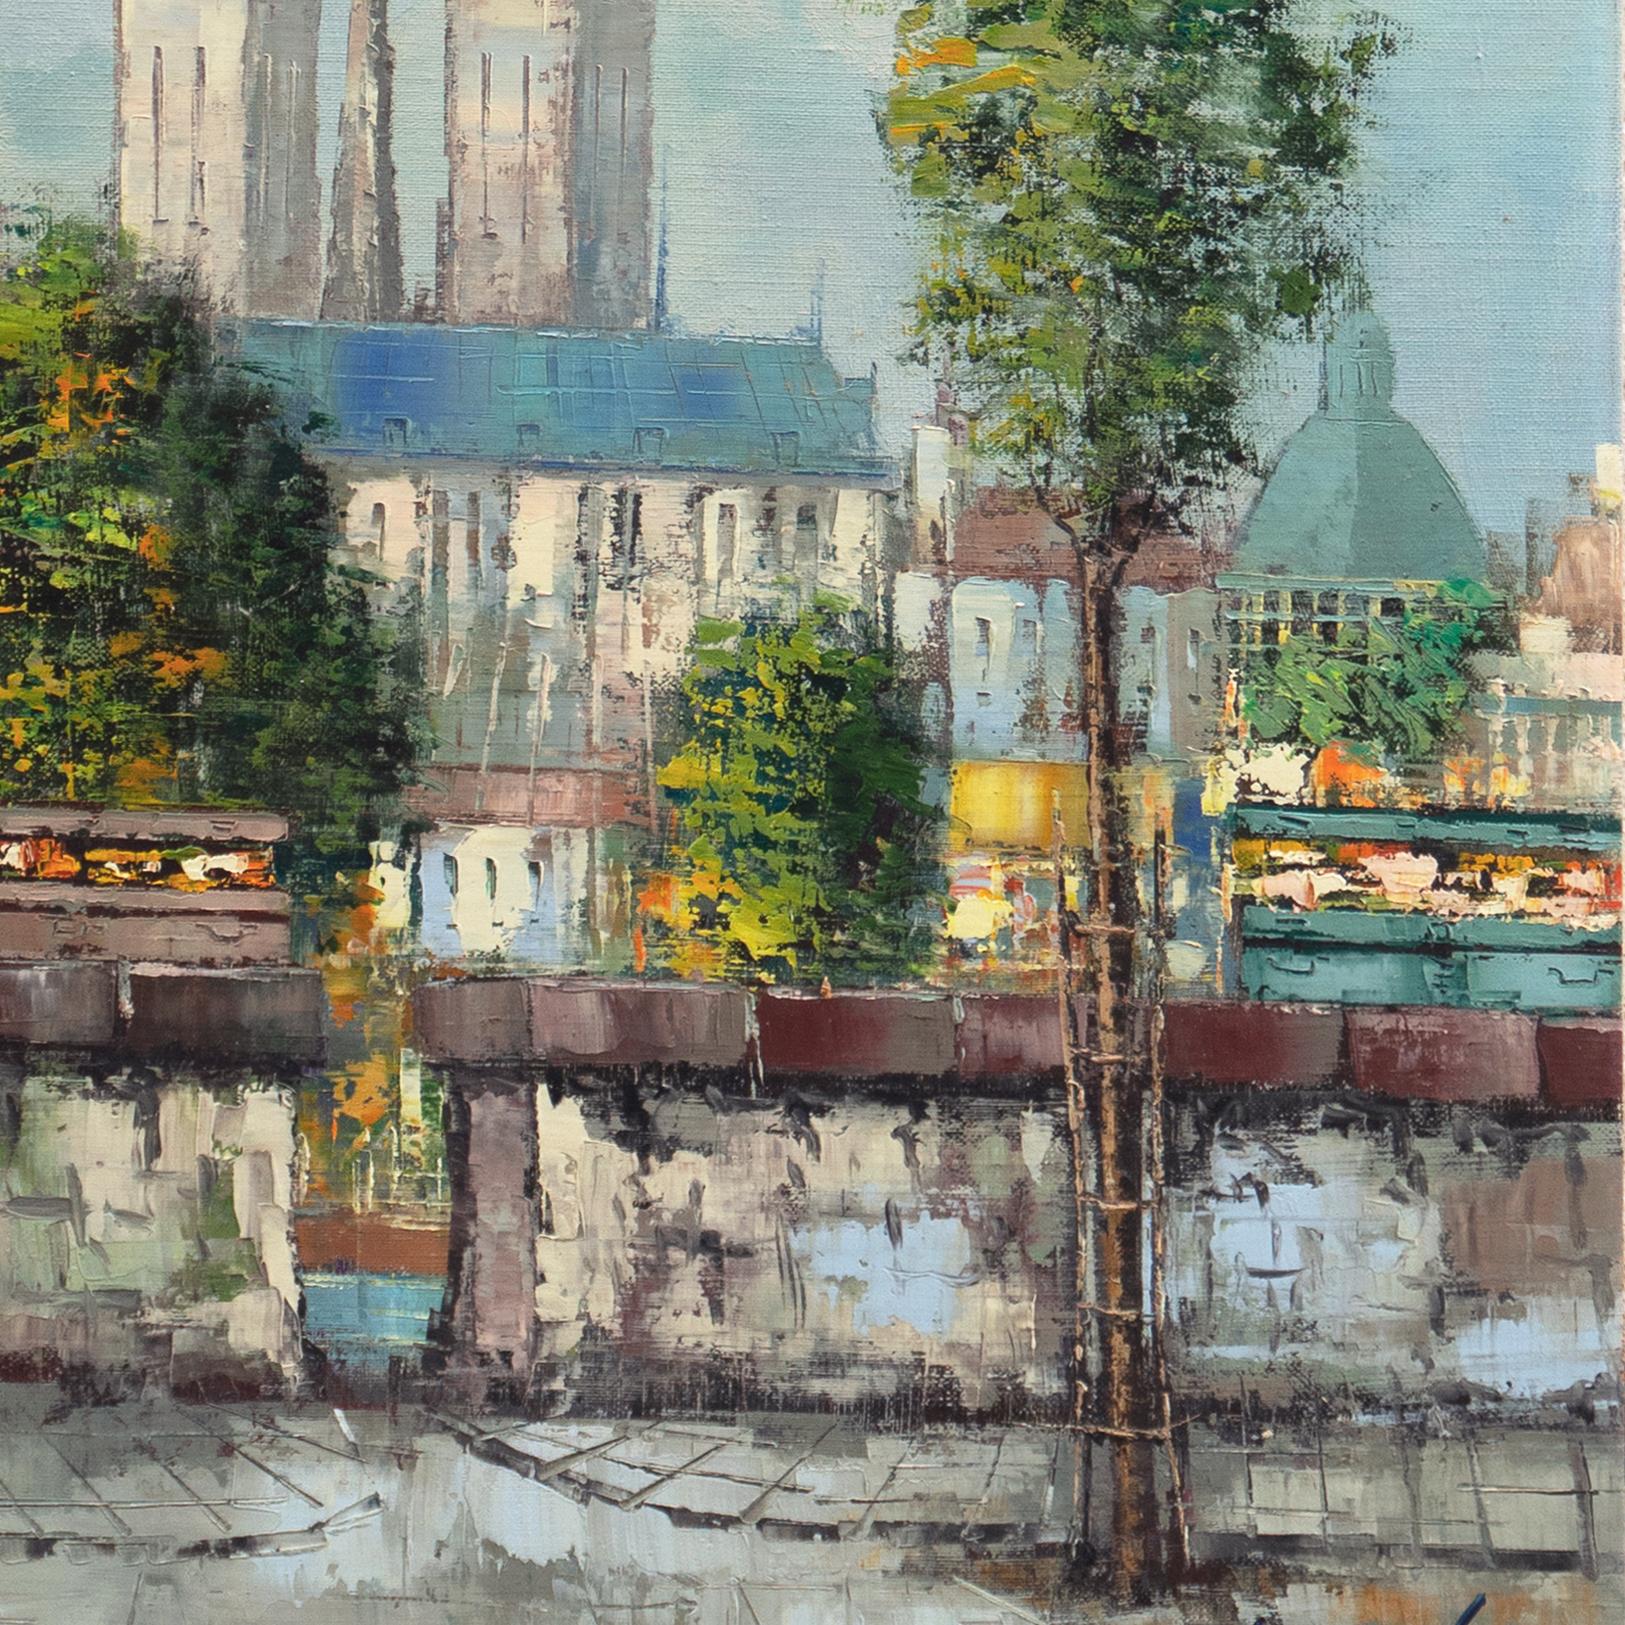 A late 20th-century, modernist view of Paris showing the Île de la Cité and Notre-Dame de Paris viewed from the Left Bank and with fresh spring foliage on the trees by the Seine. Influenced by the Expressionist style of Bernard Buffet. Signed, lower